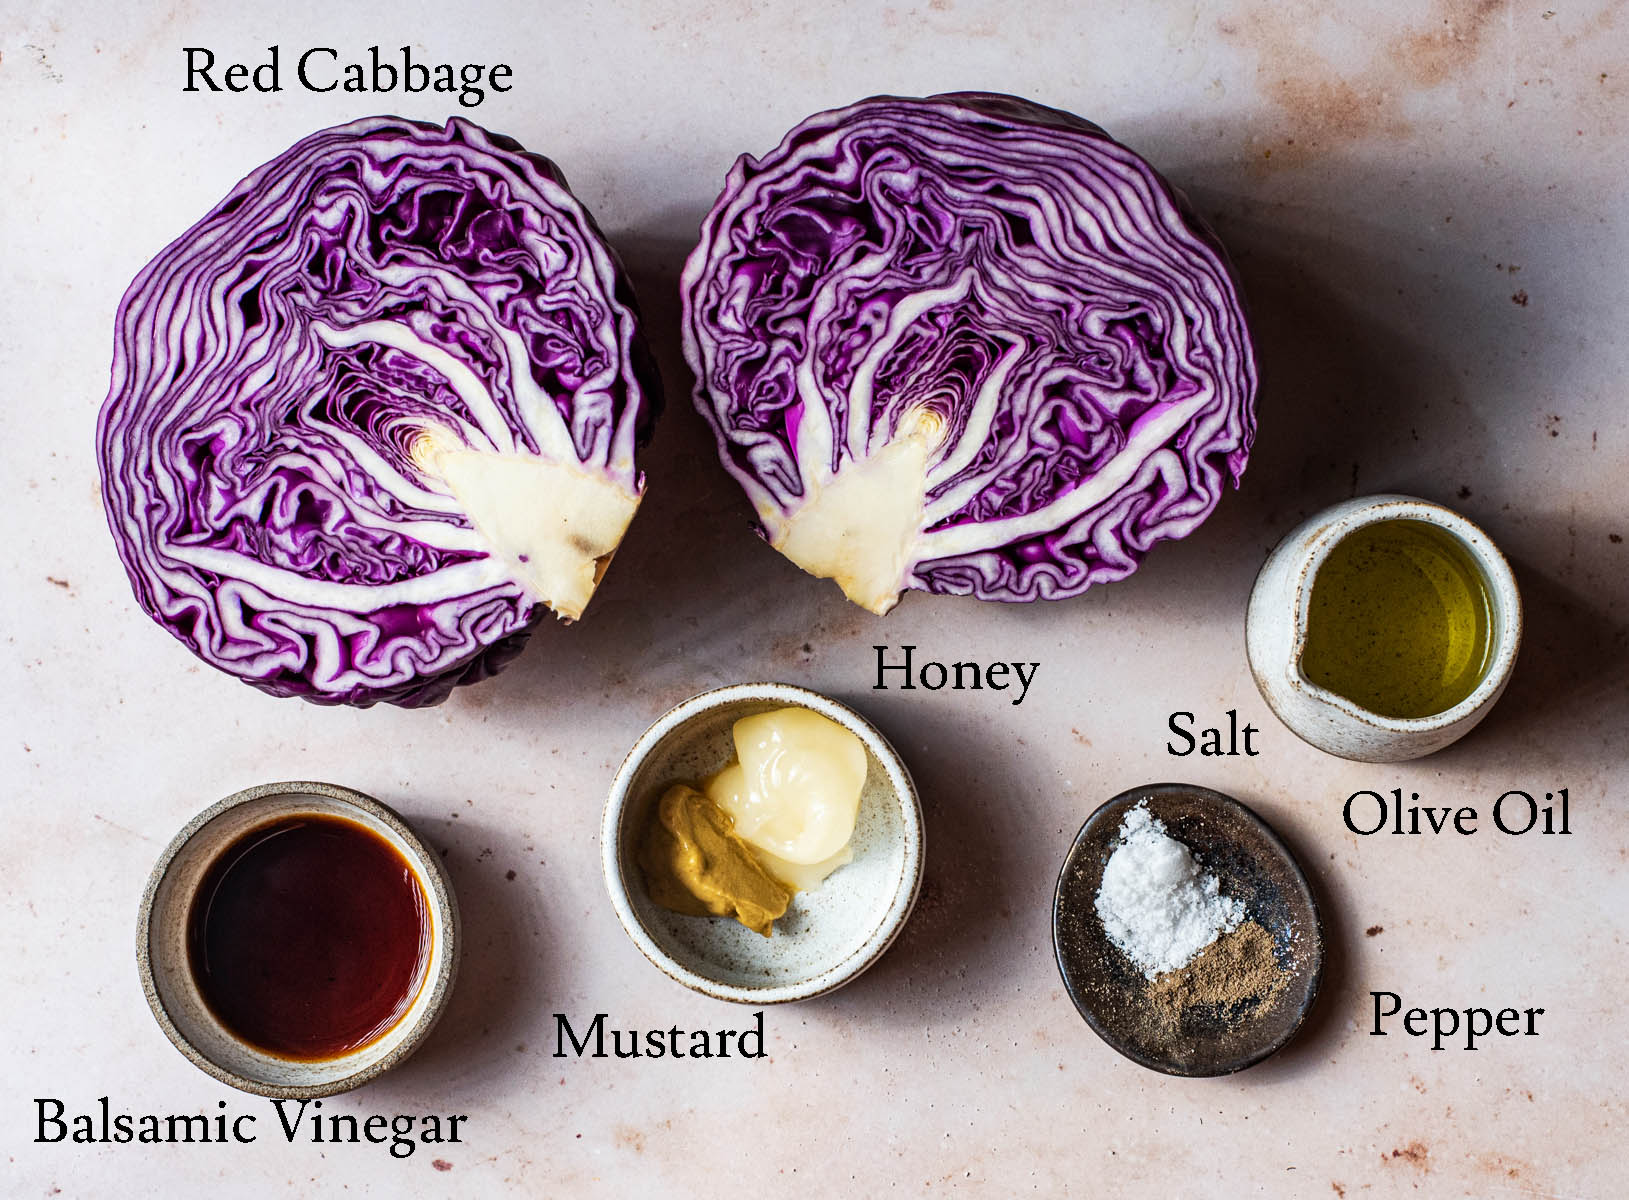 Roasted red cabbage ingredients.